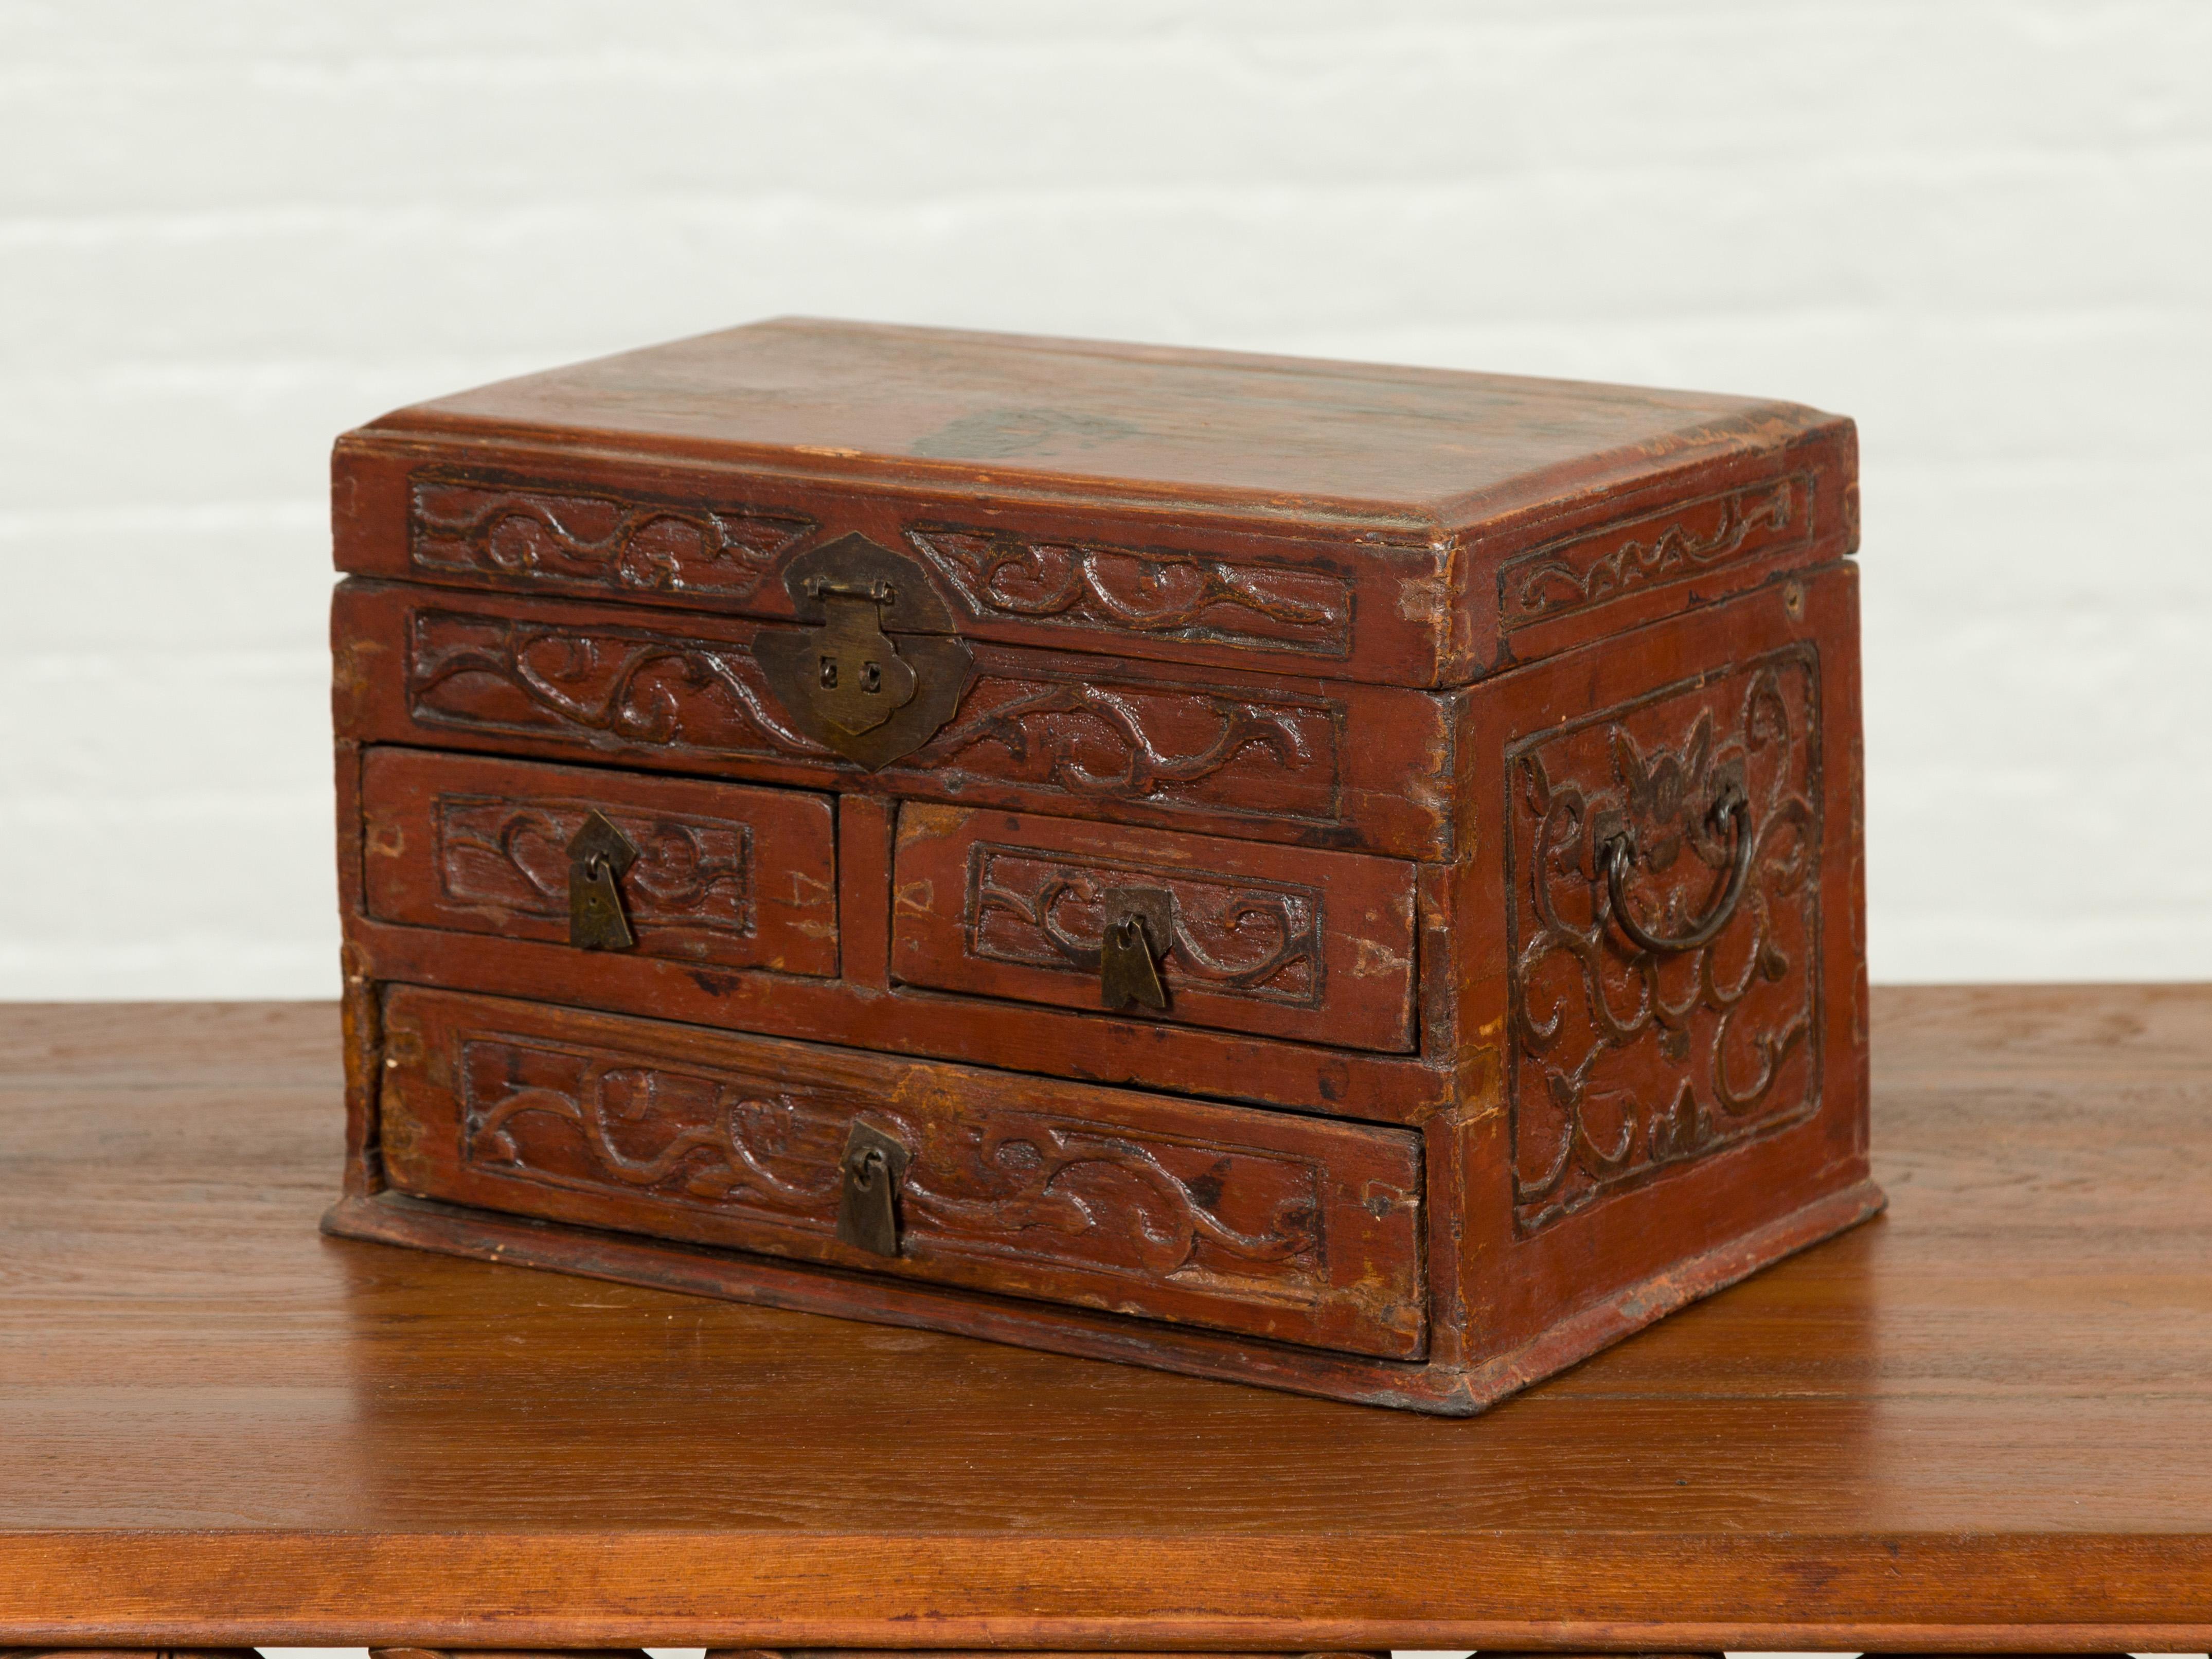 Chinese Qing Dynasty Carved Wooden Jewelry Chest with Lidded Top and Drawers 7